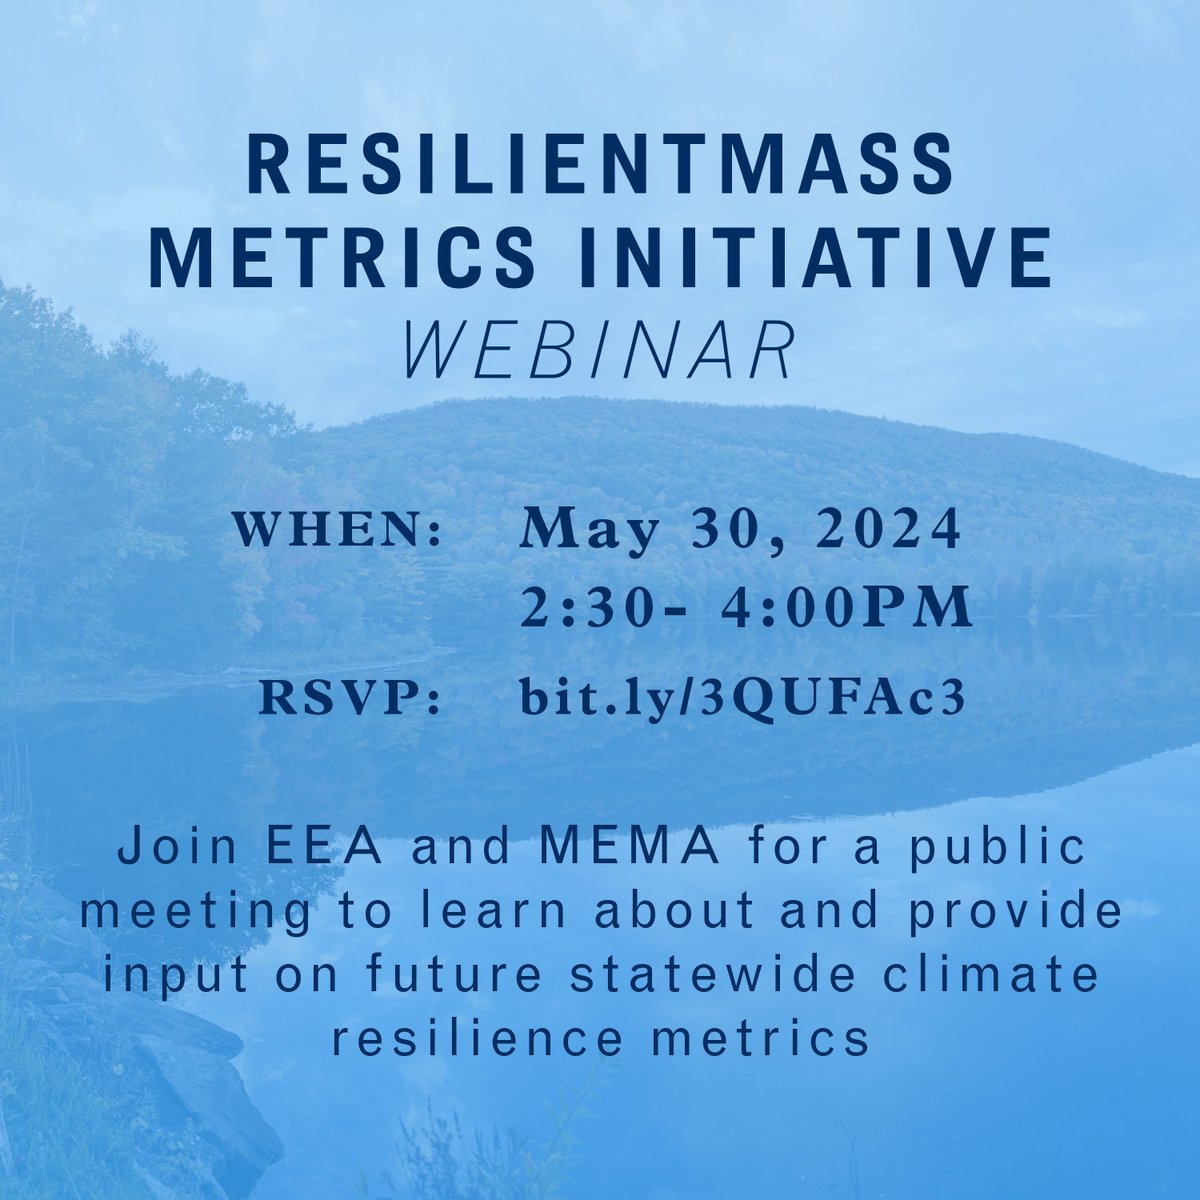 Join EEA and @MassEMA for a public webinar on the ResilientMass Metrics initiative! Learn about statewide climate resilience metrics centering environmental justice and equity and share your feedback on draft metrics. Register here: bit.ly/3QUFAc3